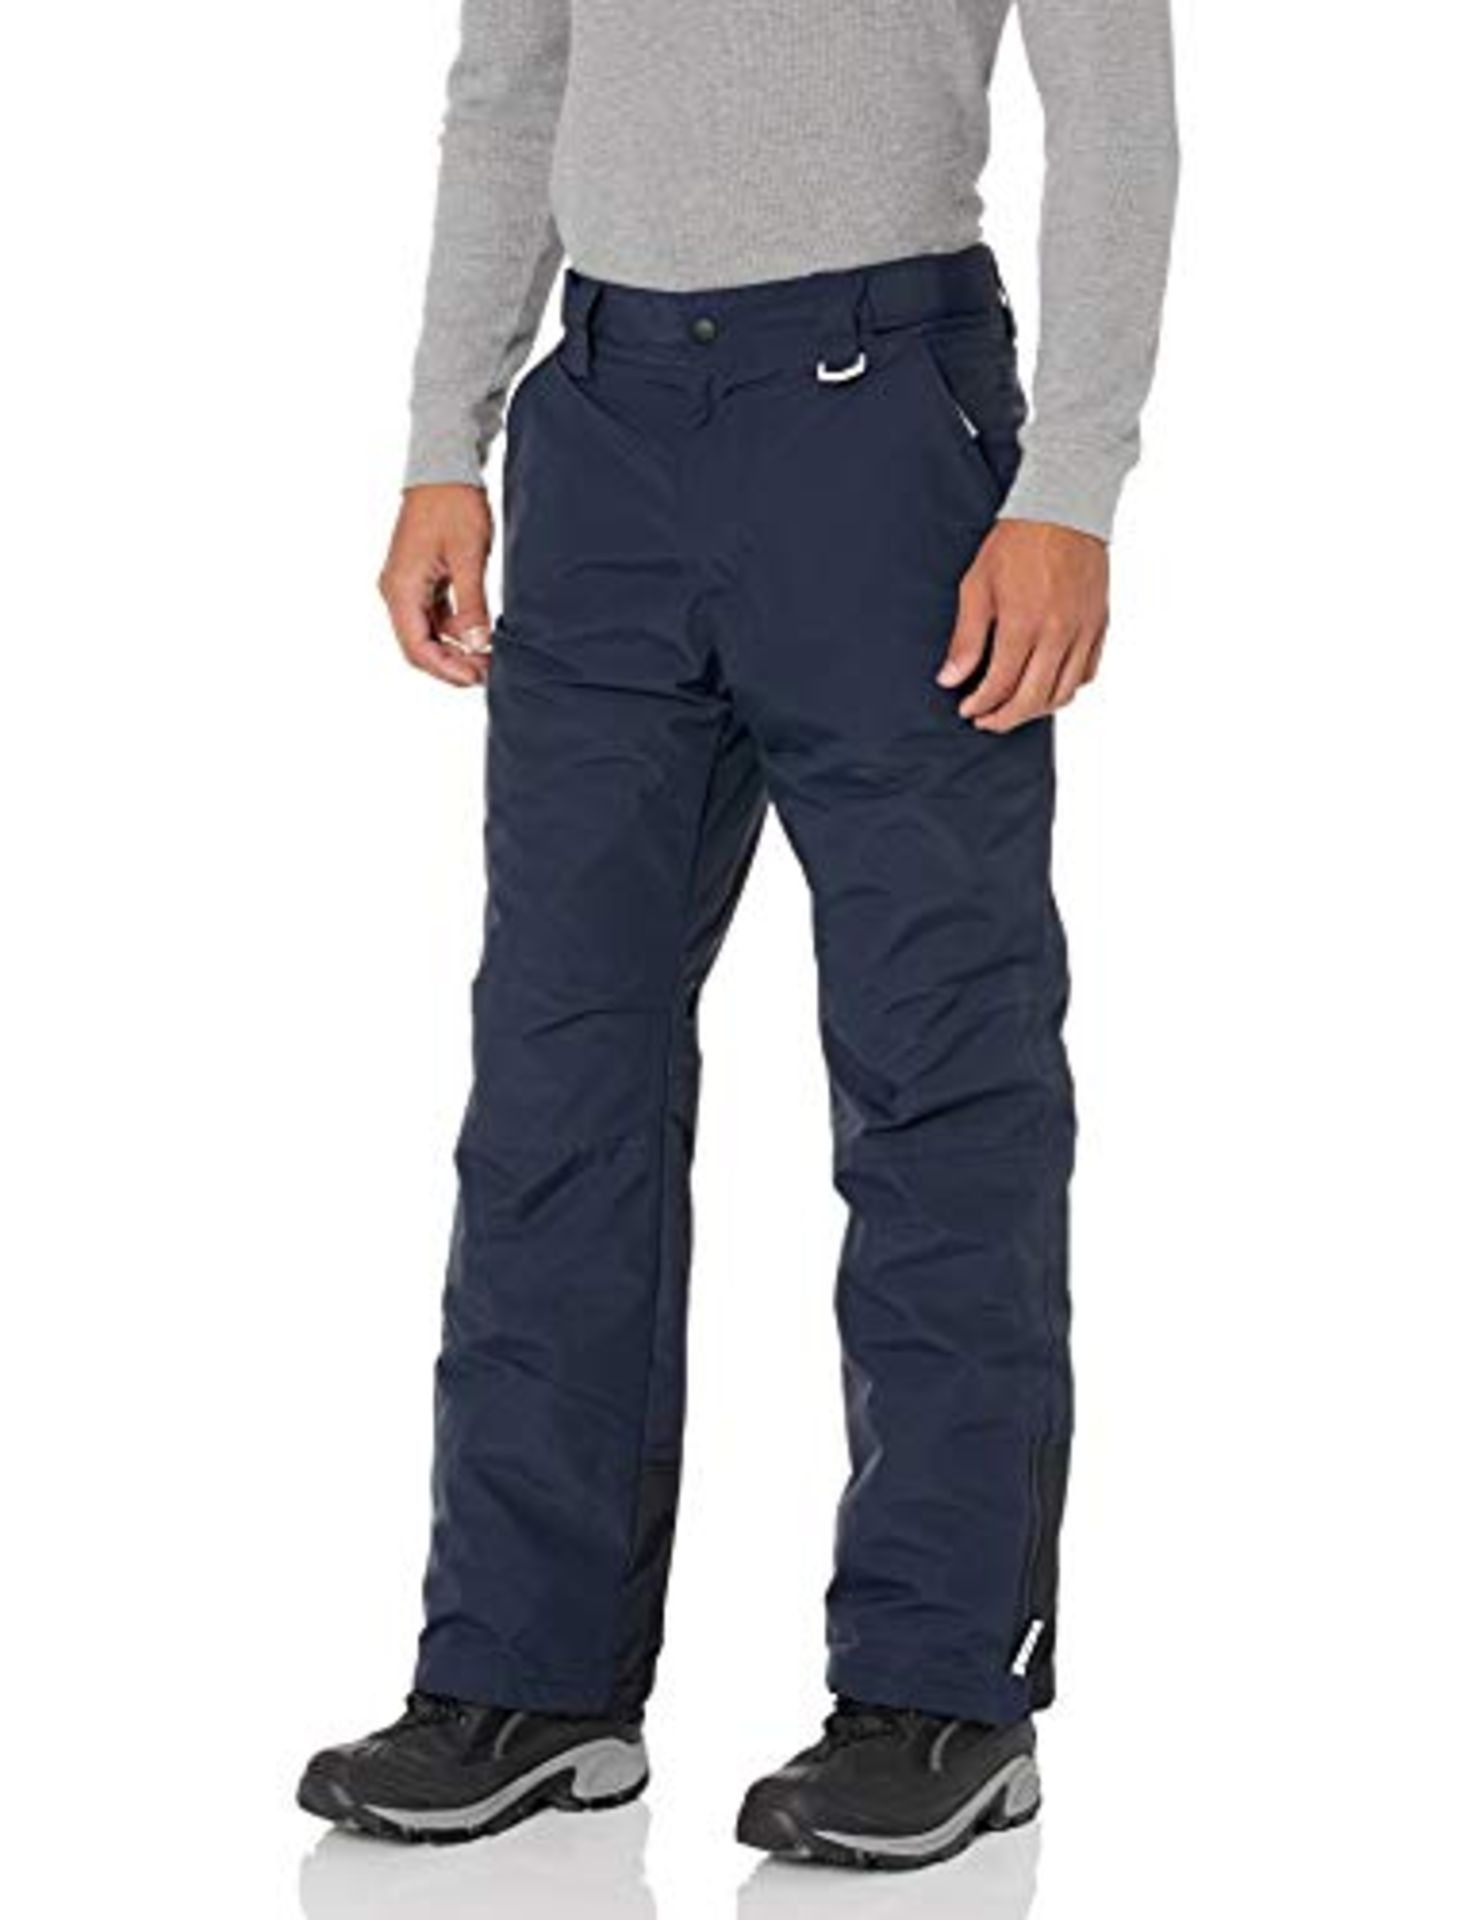 Amazon Essentials Insulated and Water-Resistant Men's Ski Pants, Navy Blue, XXL